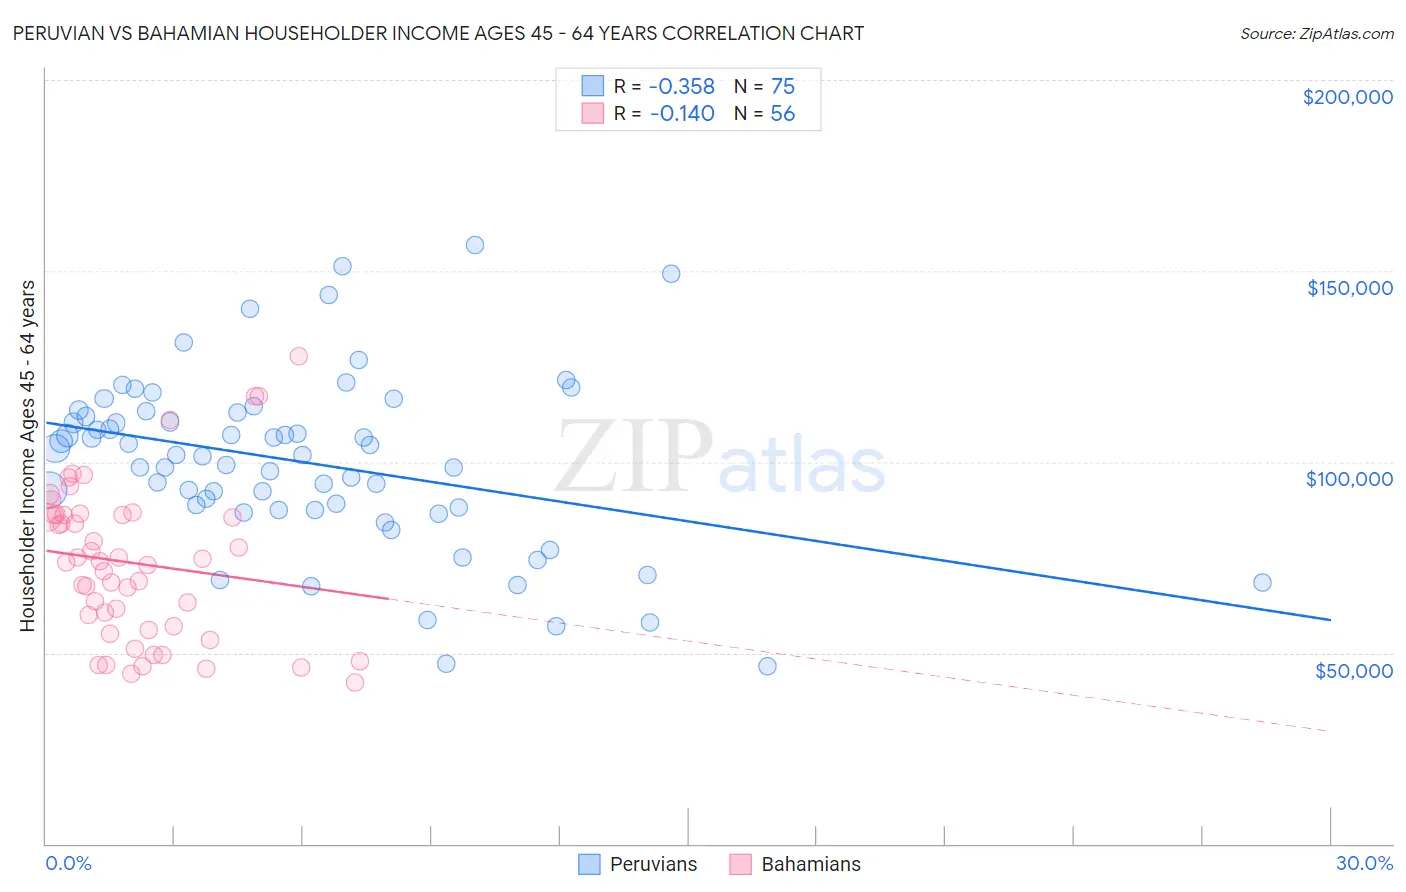 Peruvian vs Bahamian Householder Income Ages 45 - 64 years